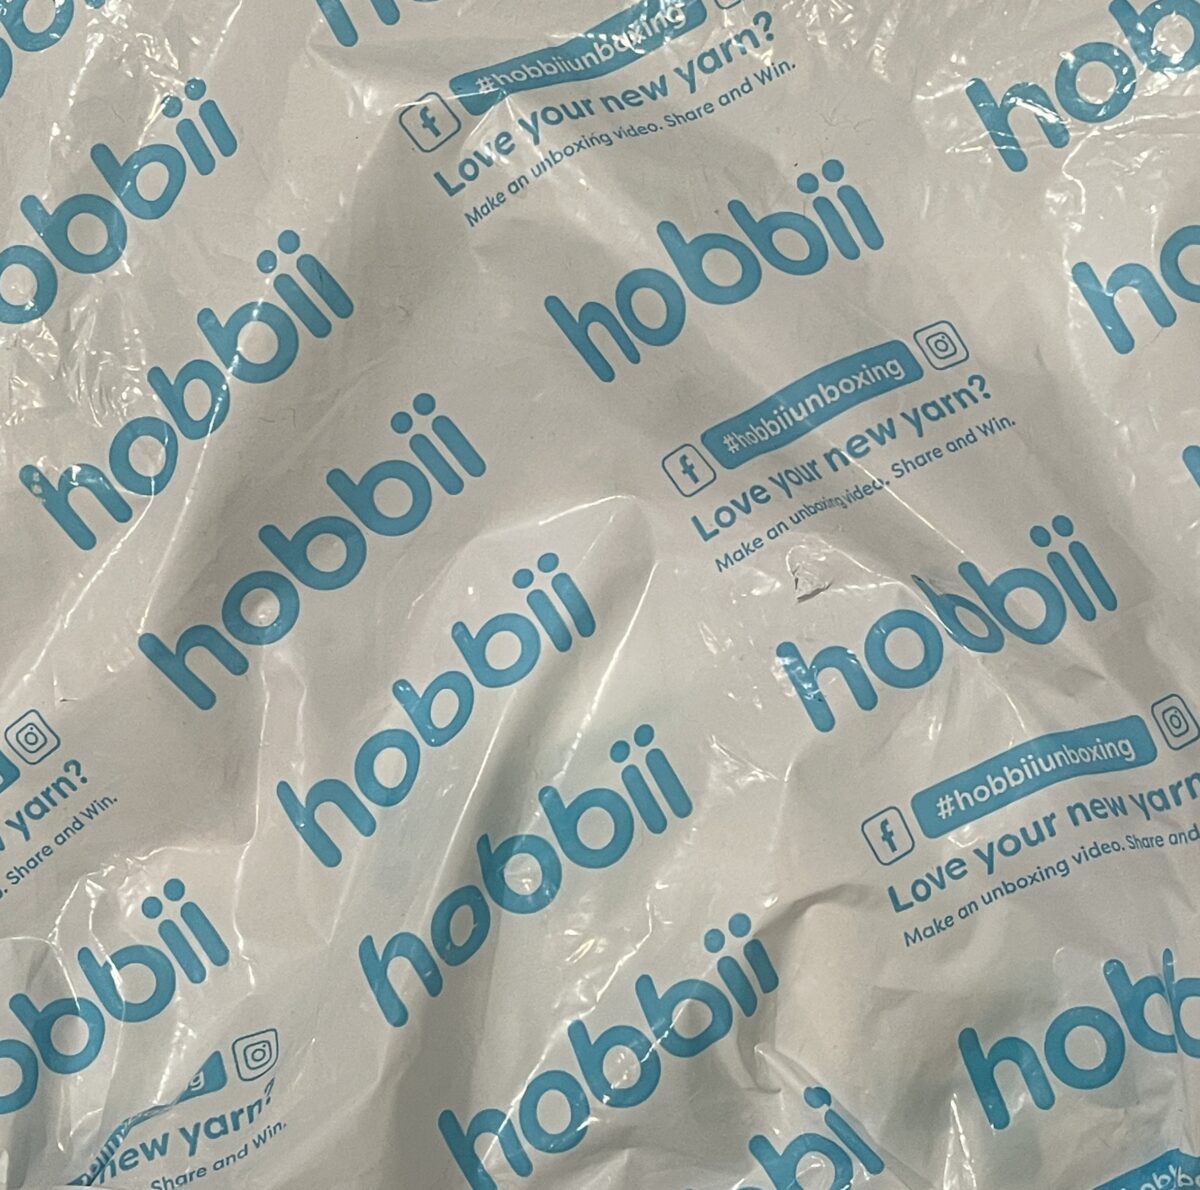 the exterior of the Hobbii Lucky Bag